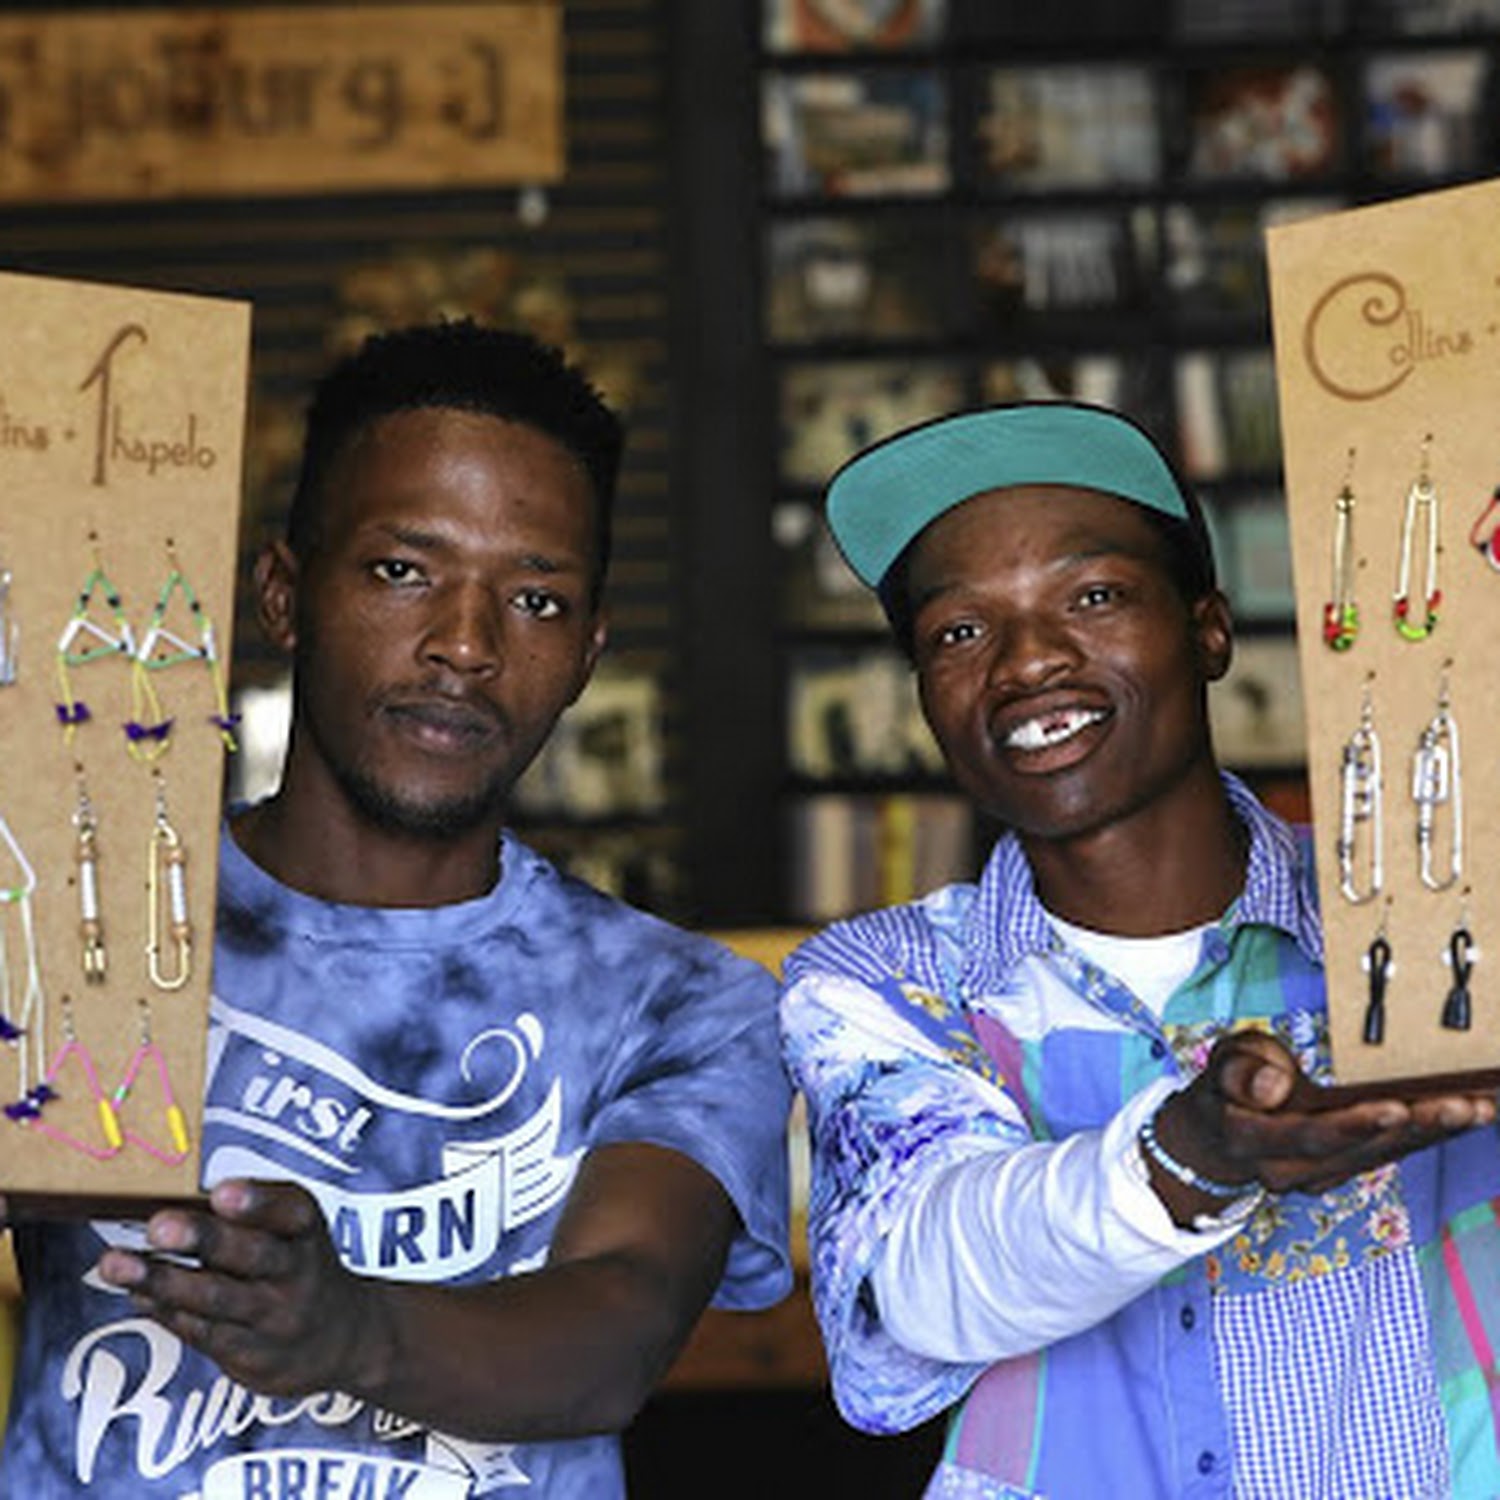 Collens and Thapelo share their story about life in a township with no hope